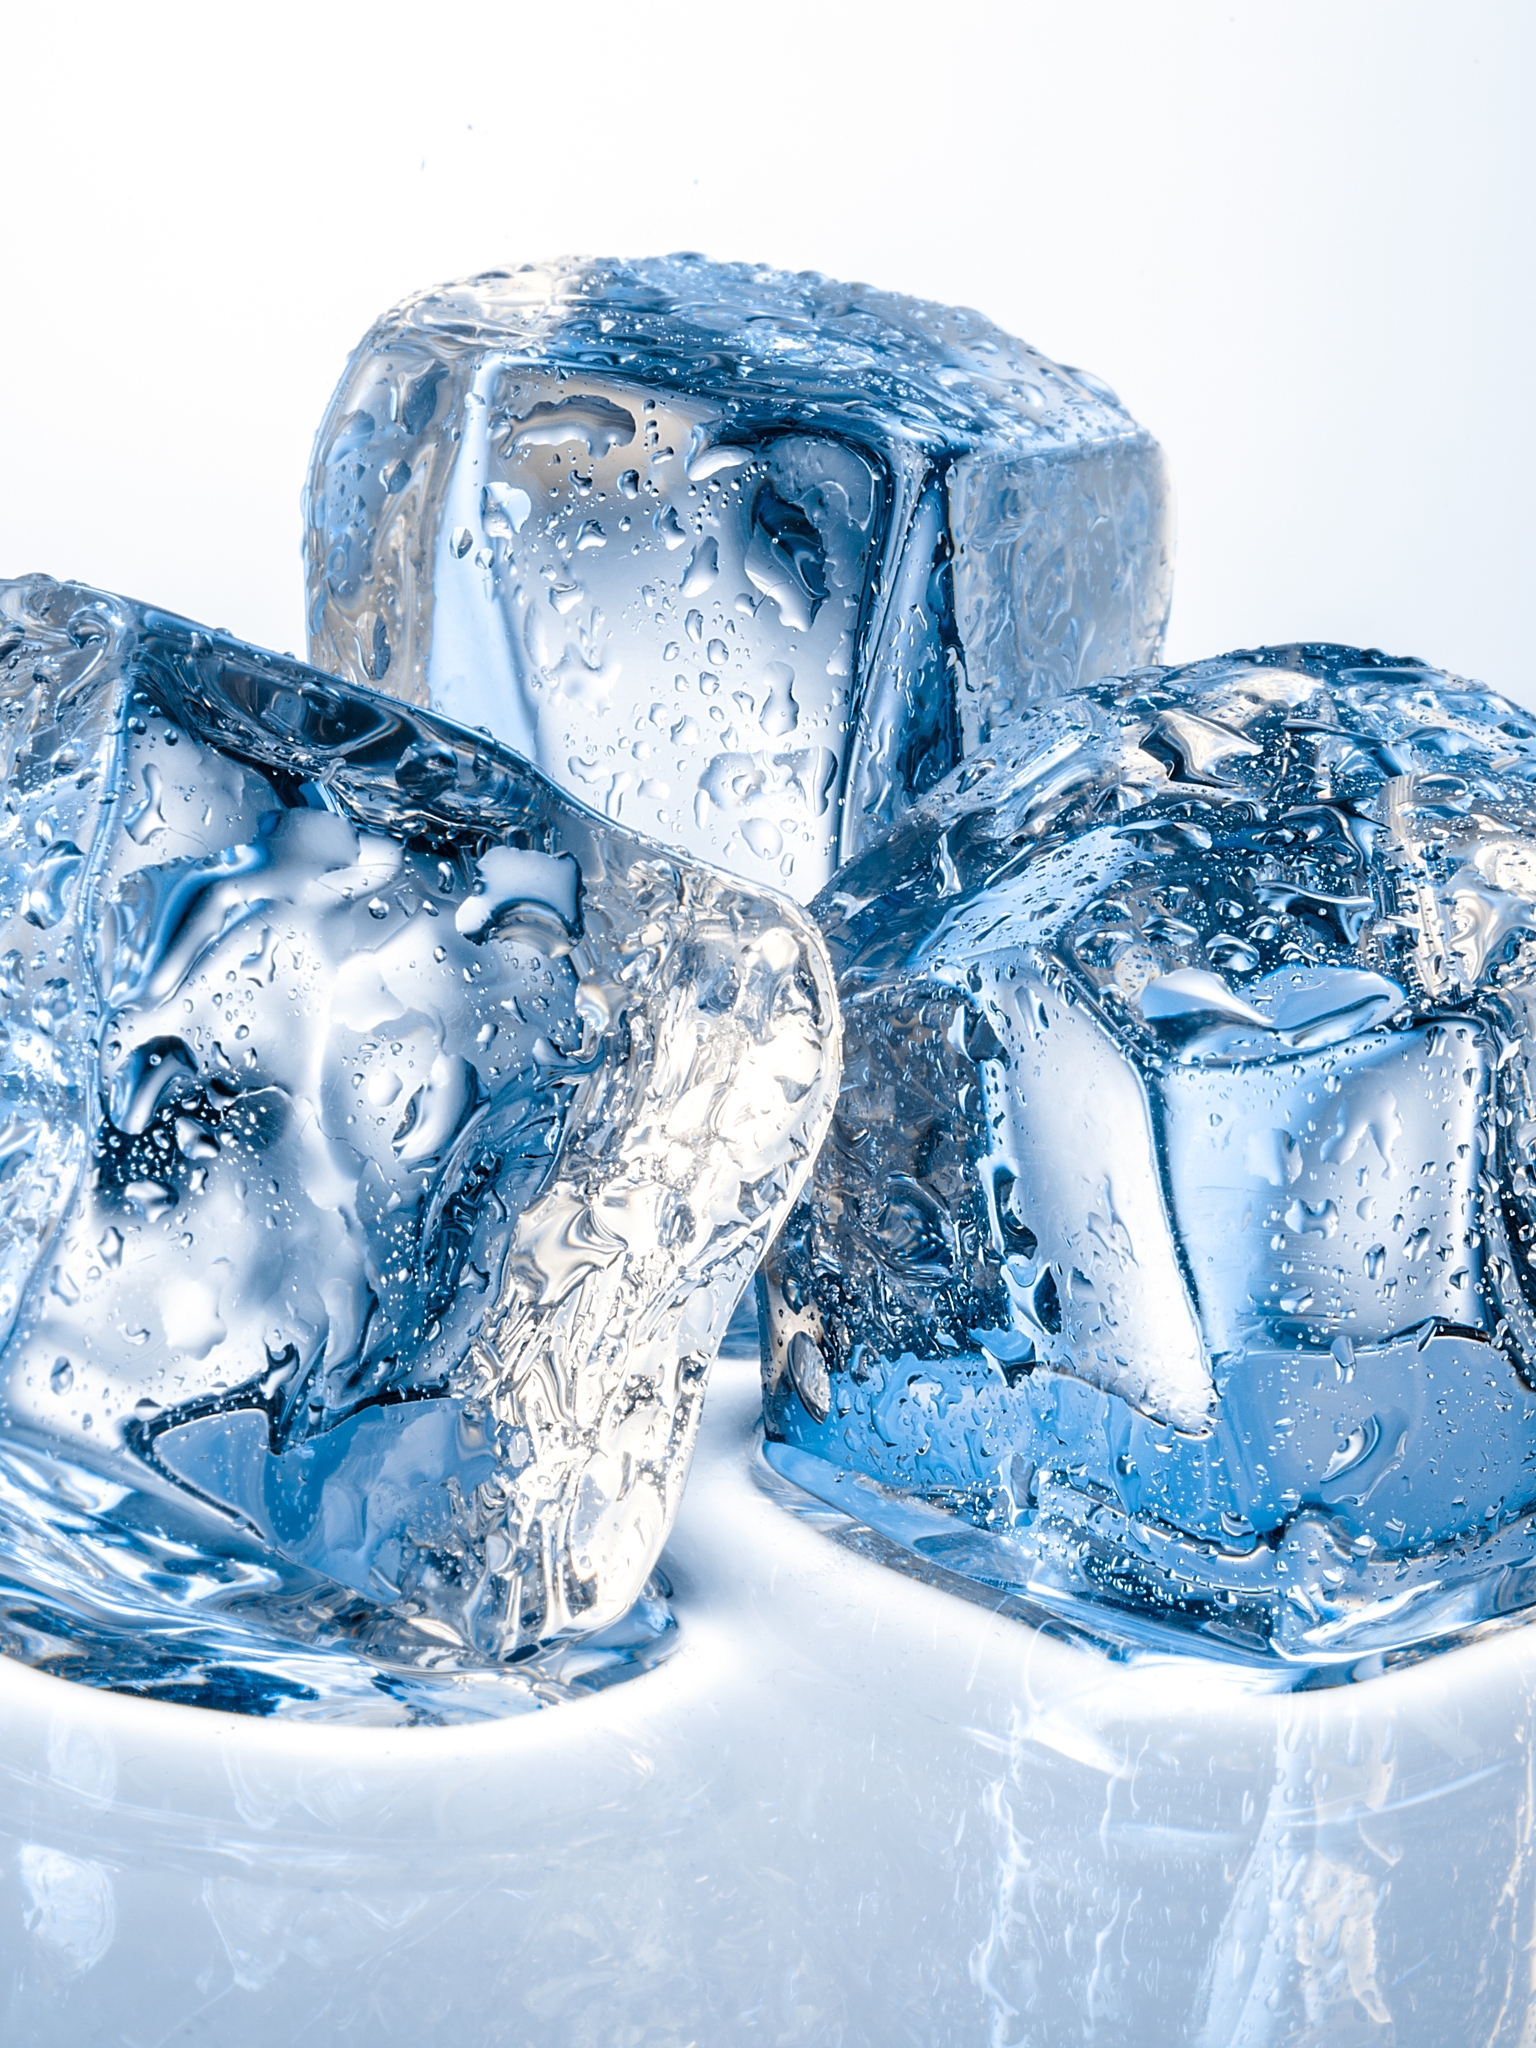 Image: Ice, water, drops, melt, three, cubes, reflection